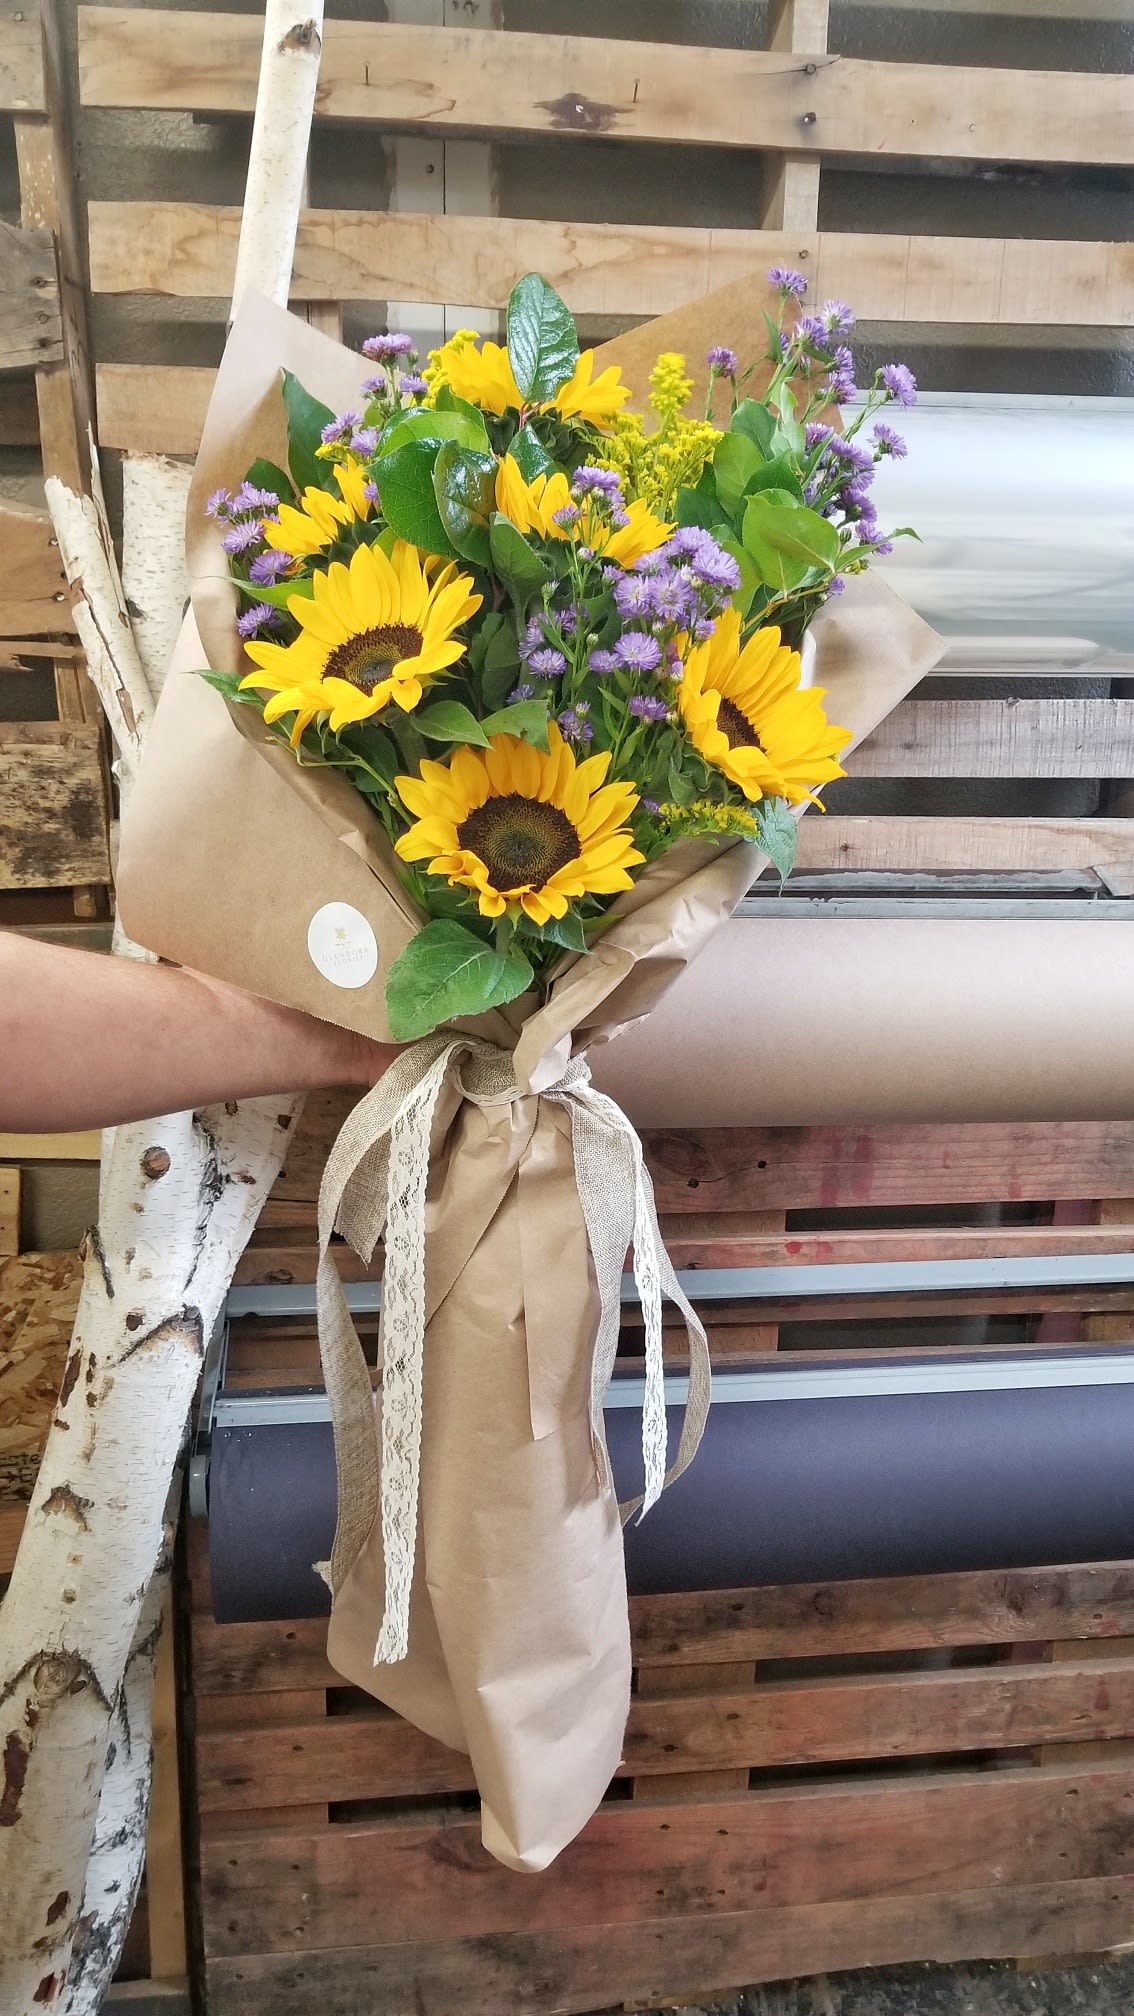 Grand Sunflower Wrap - Beautiful Sunflower gourmet wrap mix of sunflowers and complimenting textures. Wrap is over 3ft tall! Perfect for any occasion!